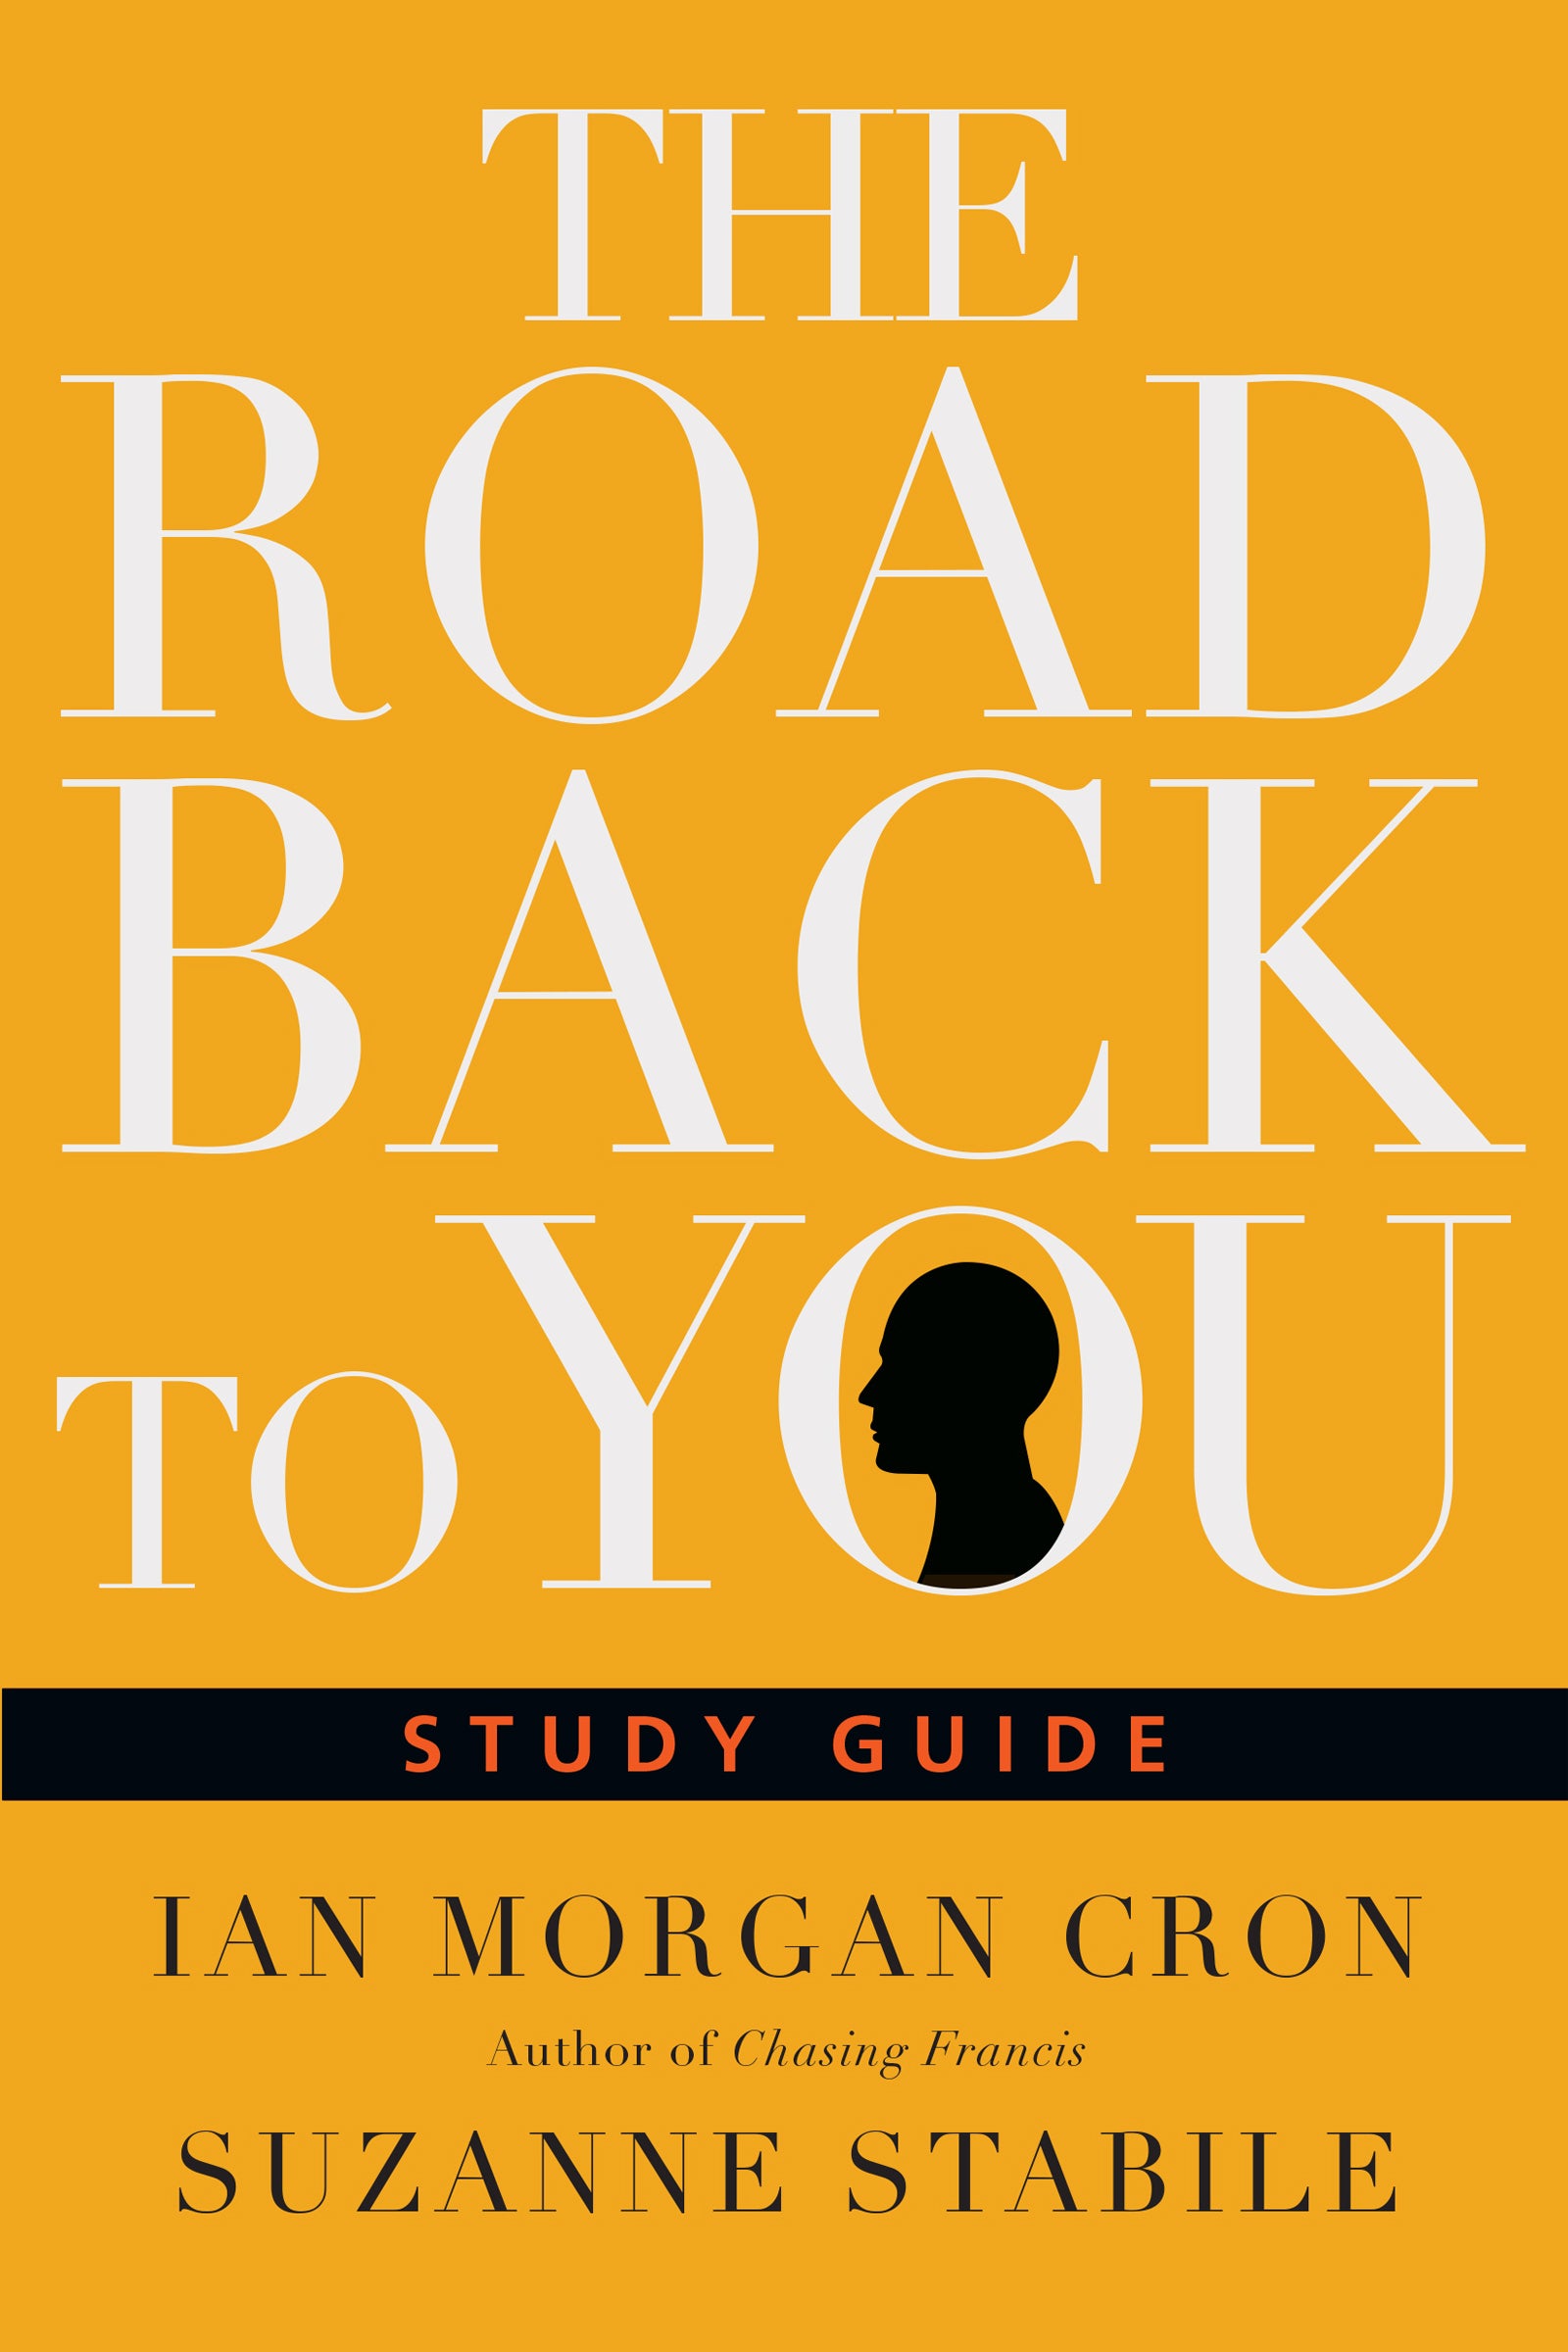 Image of The Road Back to You Study Guide other